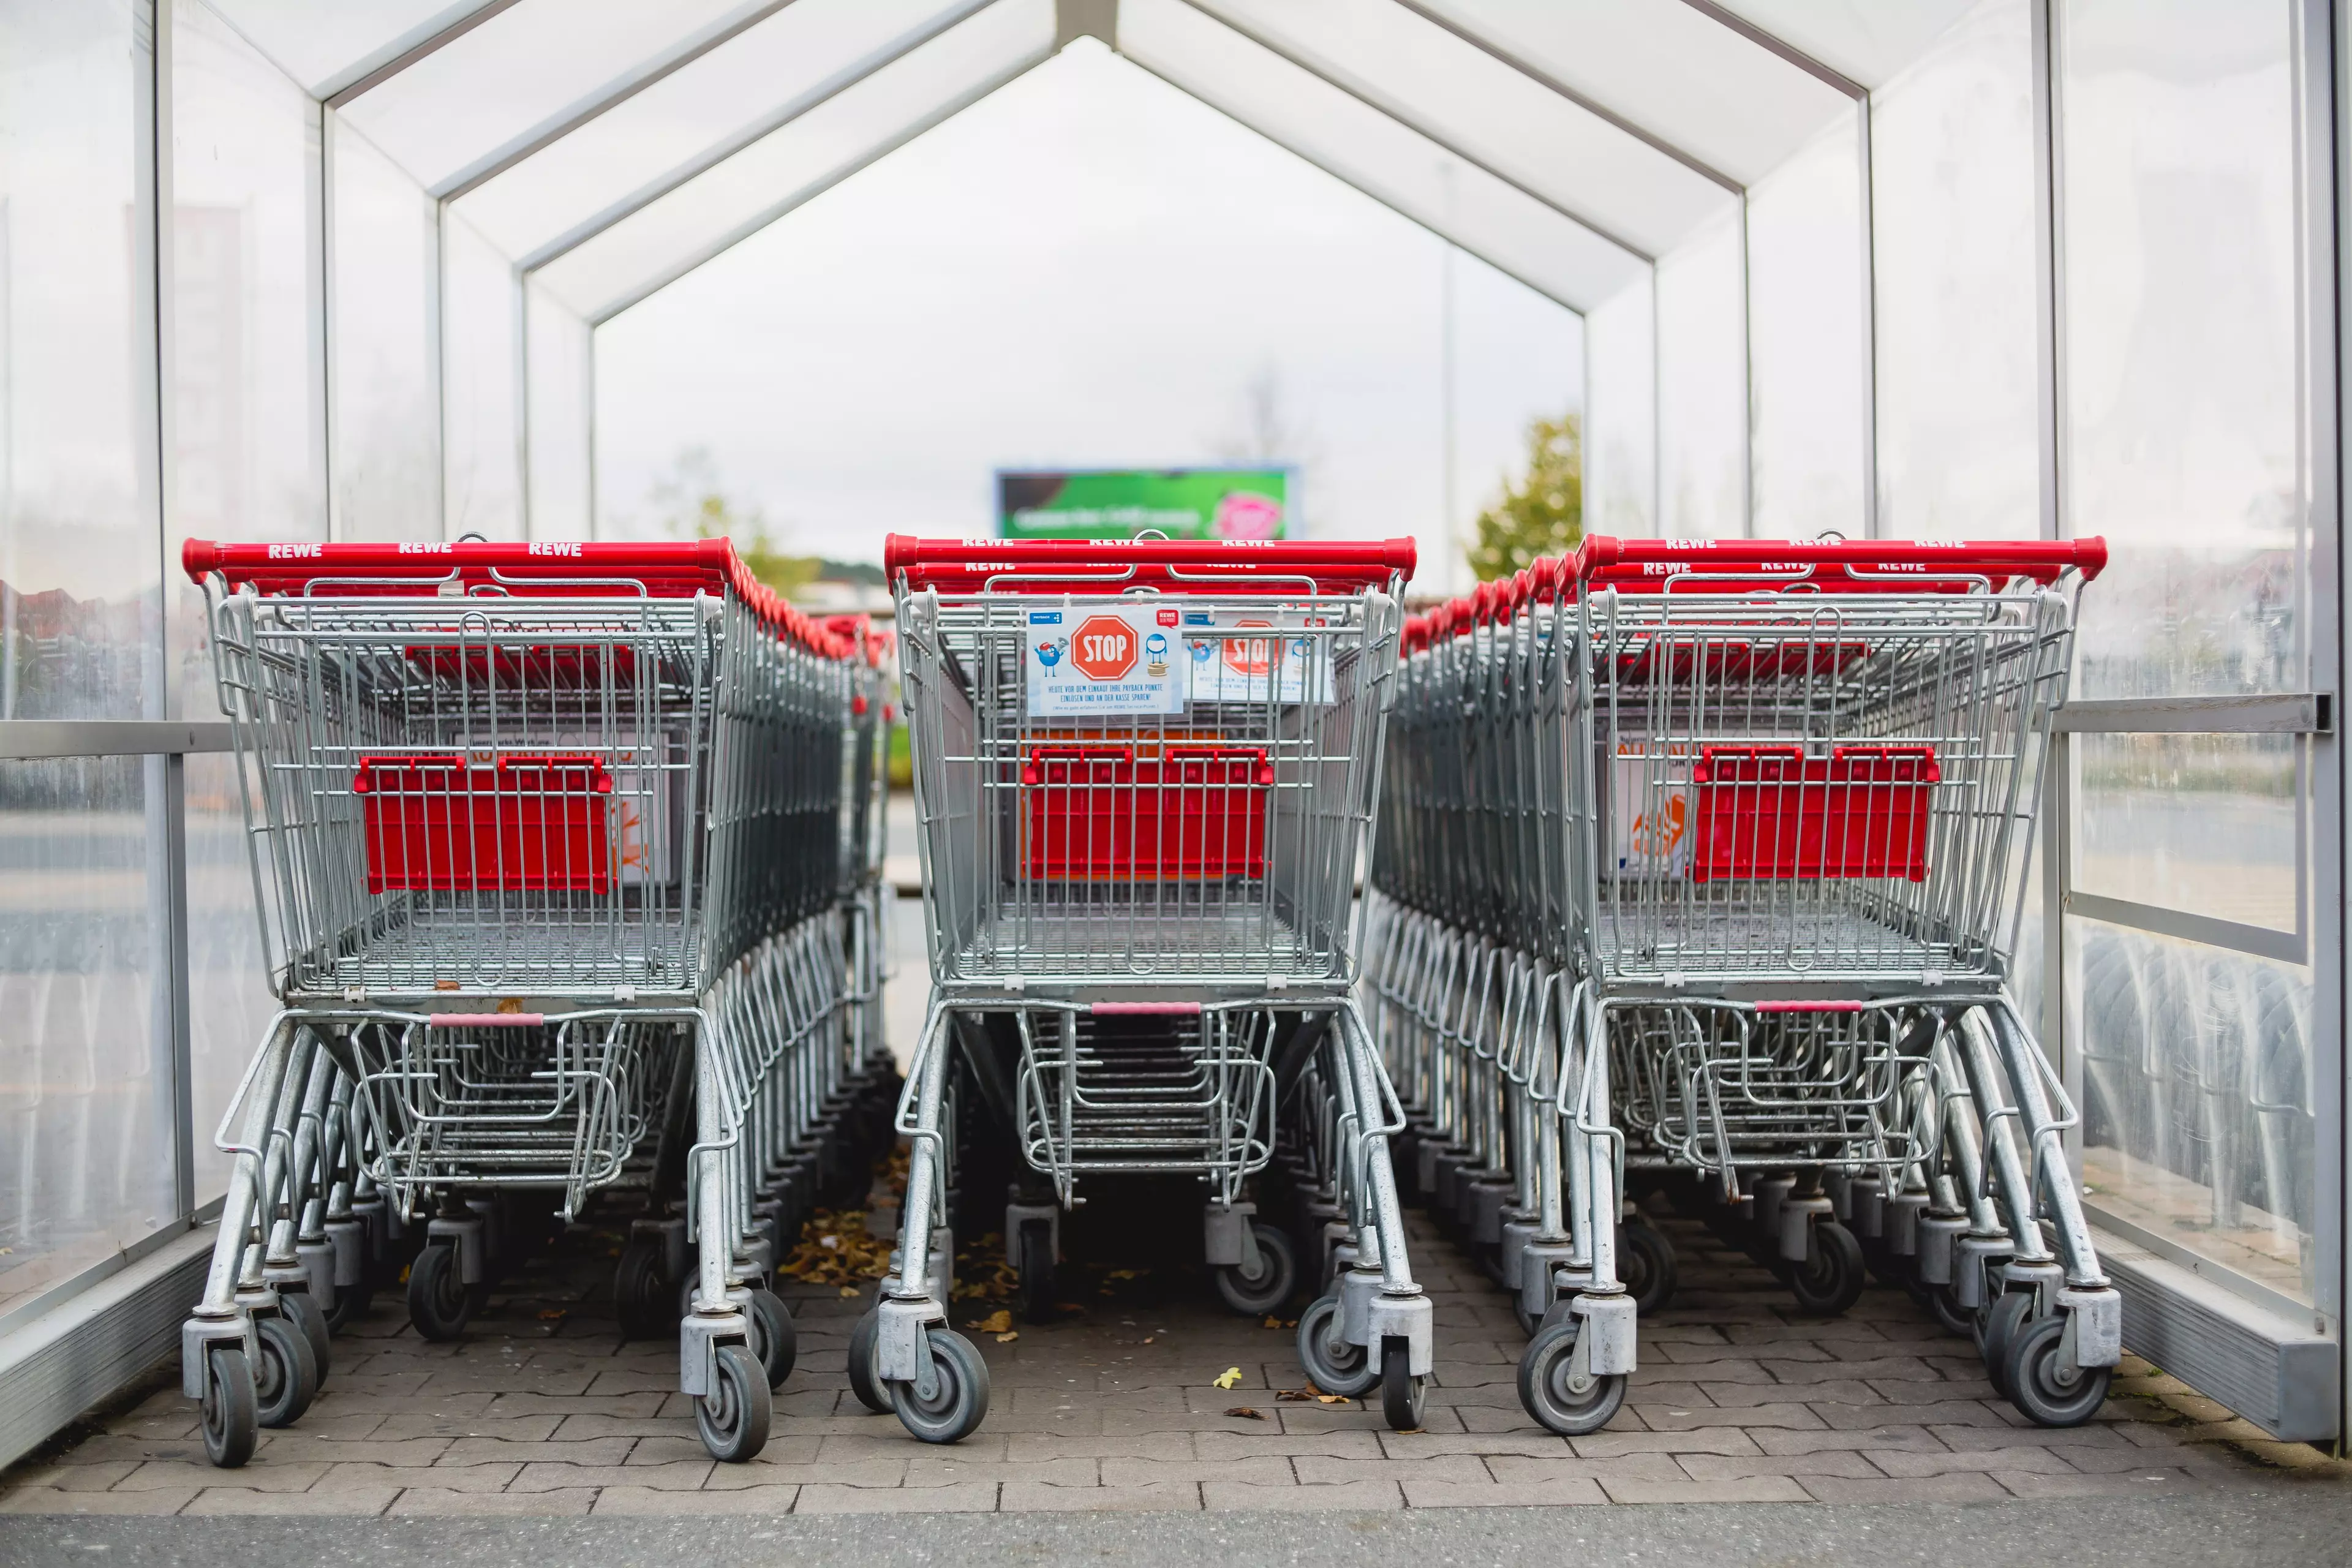 Aldi have advised shoppers not to touch trolleys until they are positioned in front of the store, once deep cleaned (